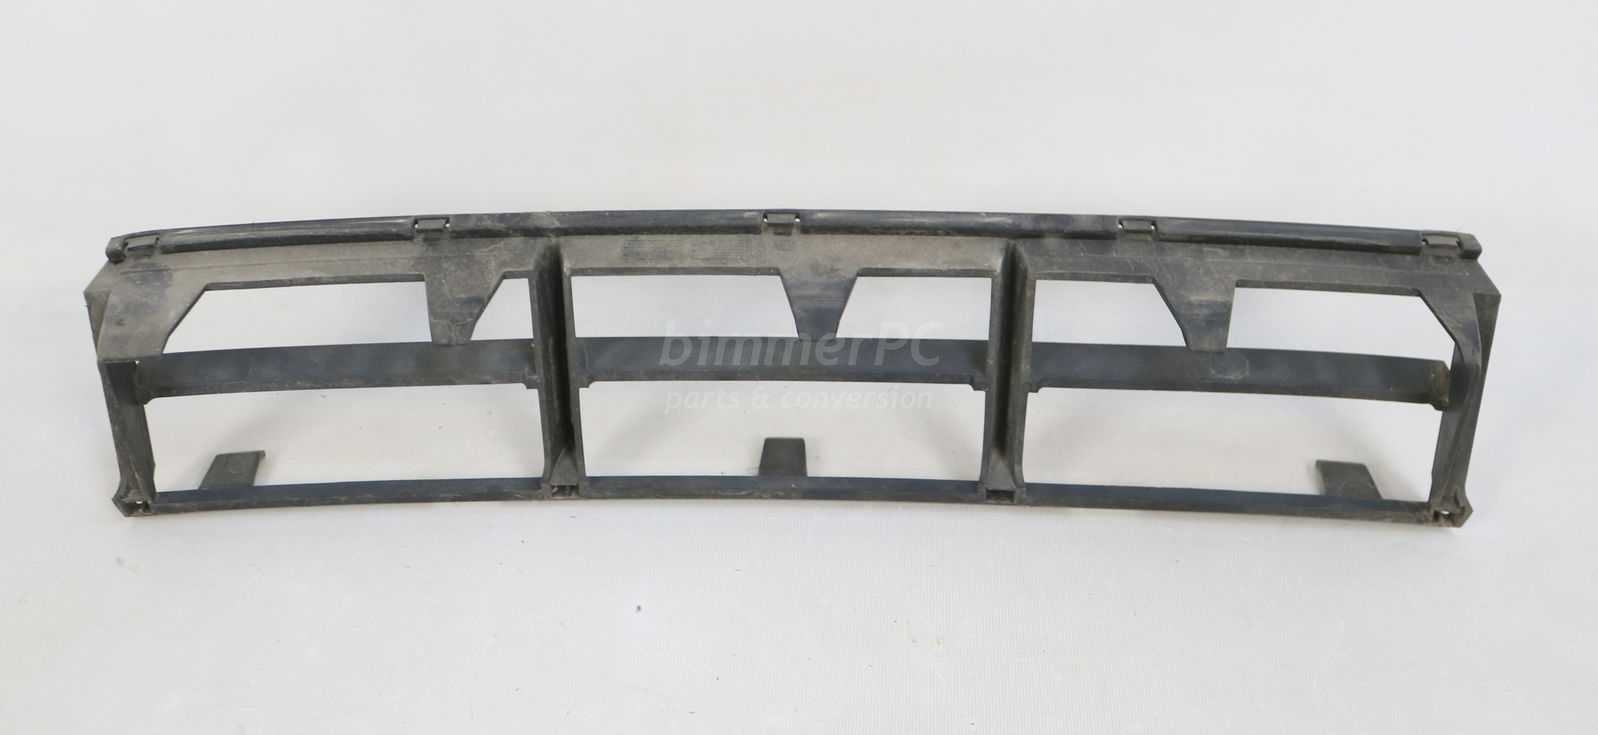 Picture of BMW 51118235671 Front Bumper Center Lower Vent Grille Valence Insert Trim E39 for sale